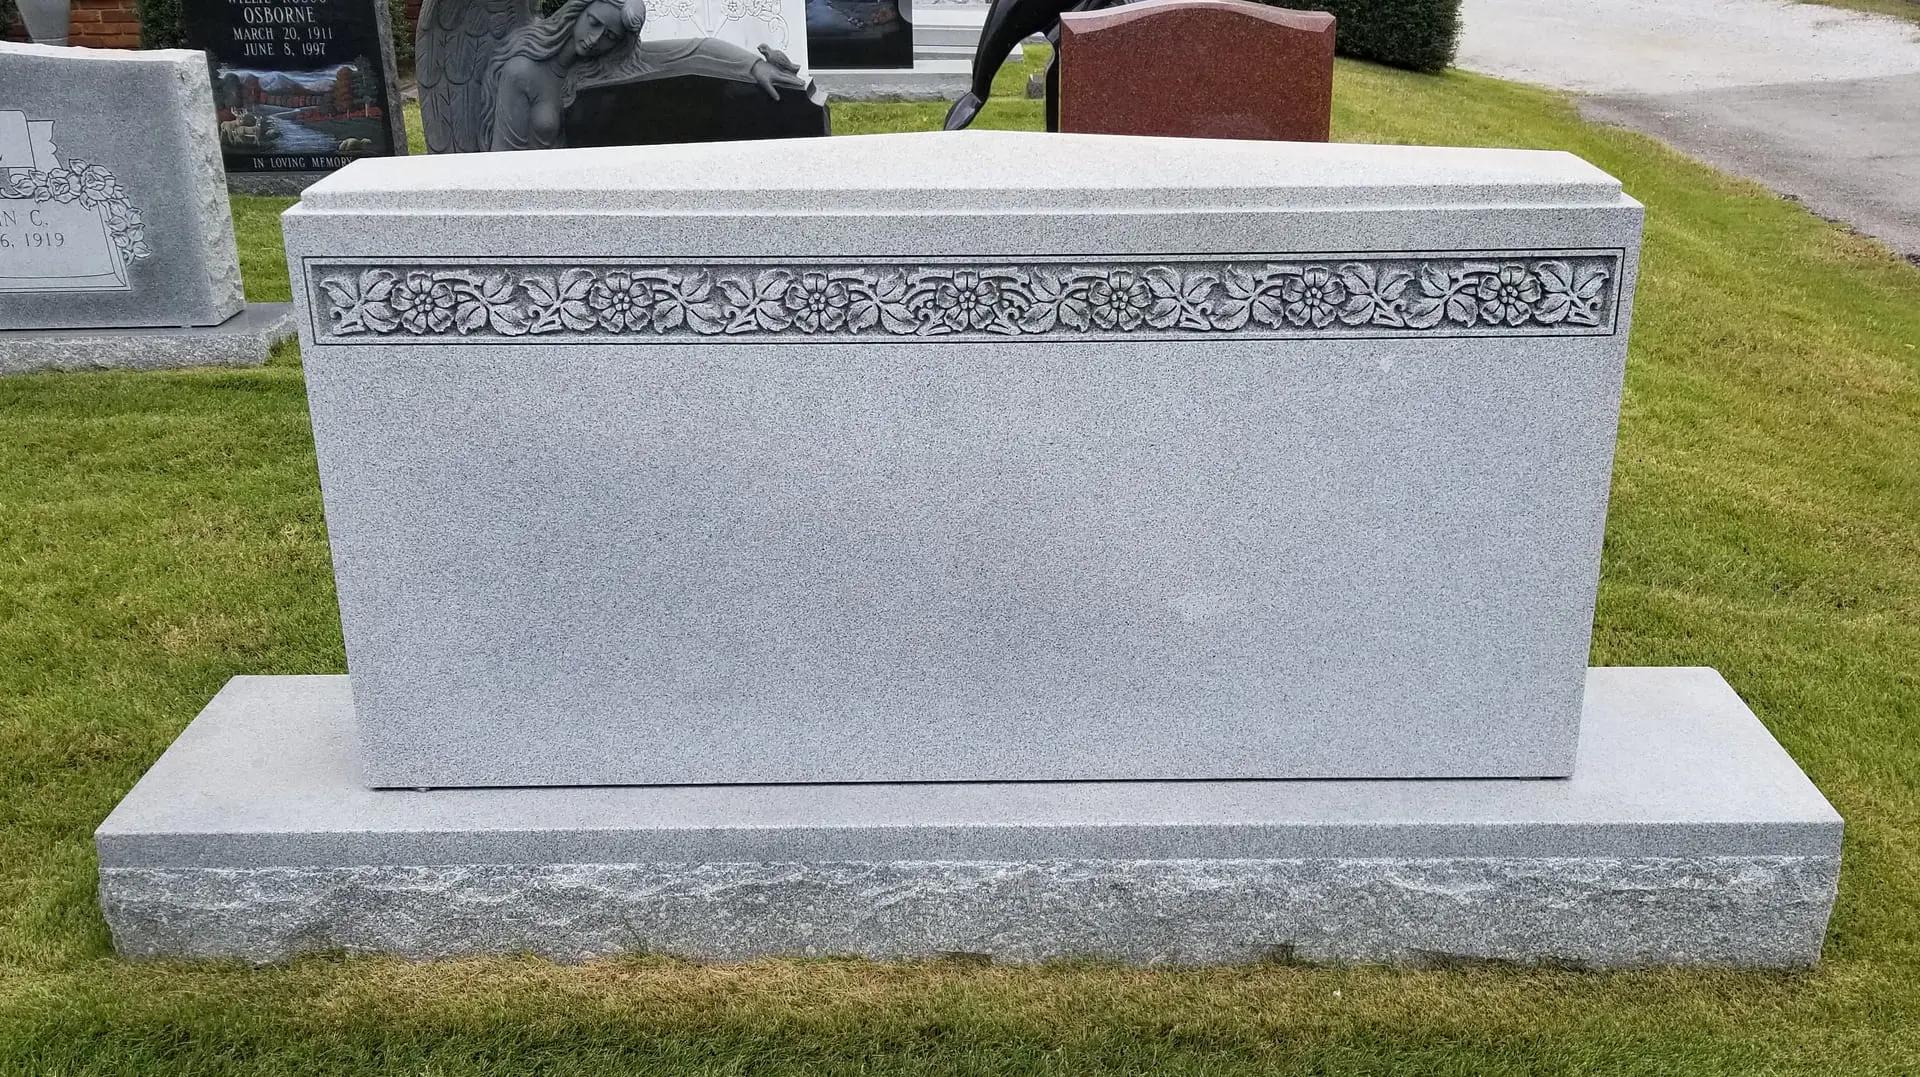 A memorial slab for at the graveyard with no name